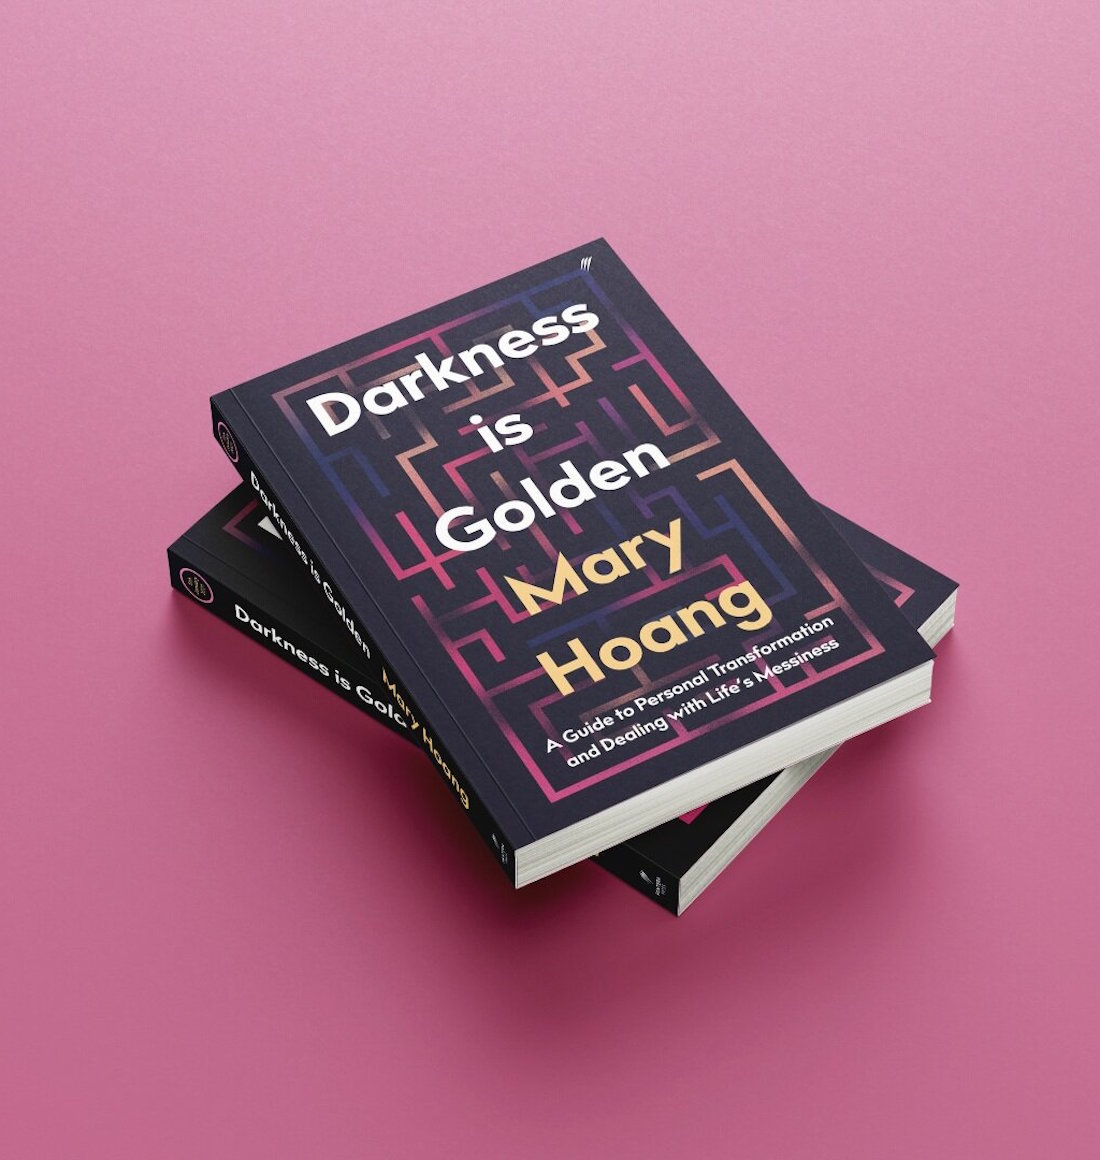 Two books lie stacked on top of eachother against a pink background.